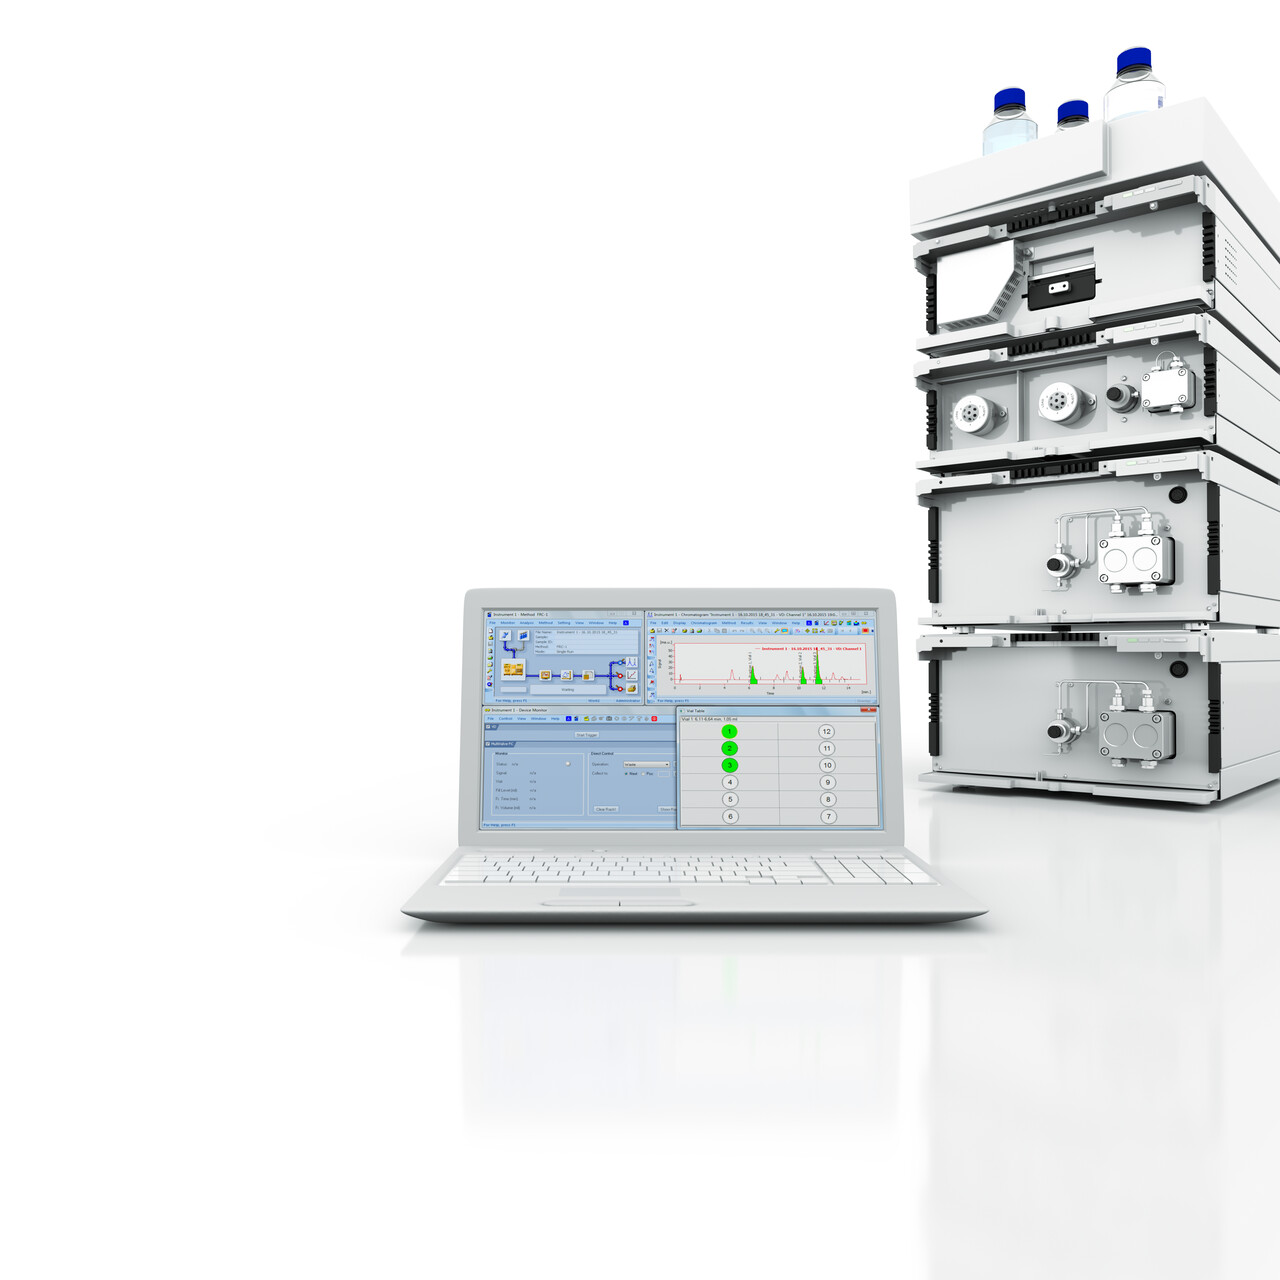 How much detection does a preparative HPLC system need?